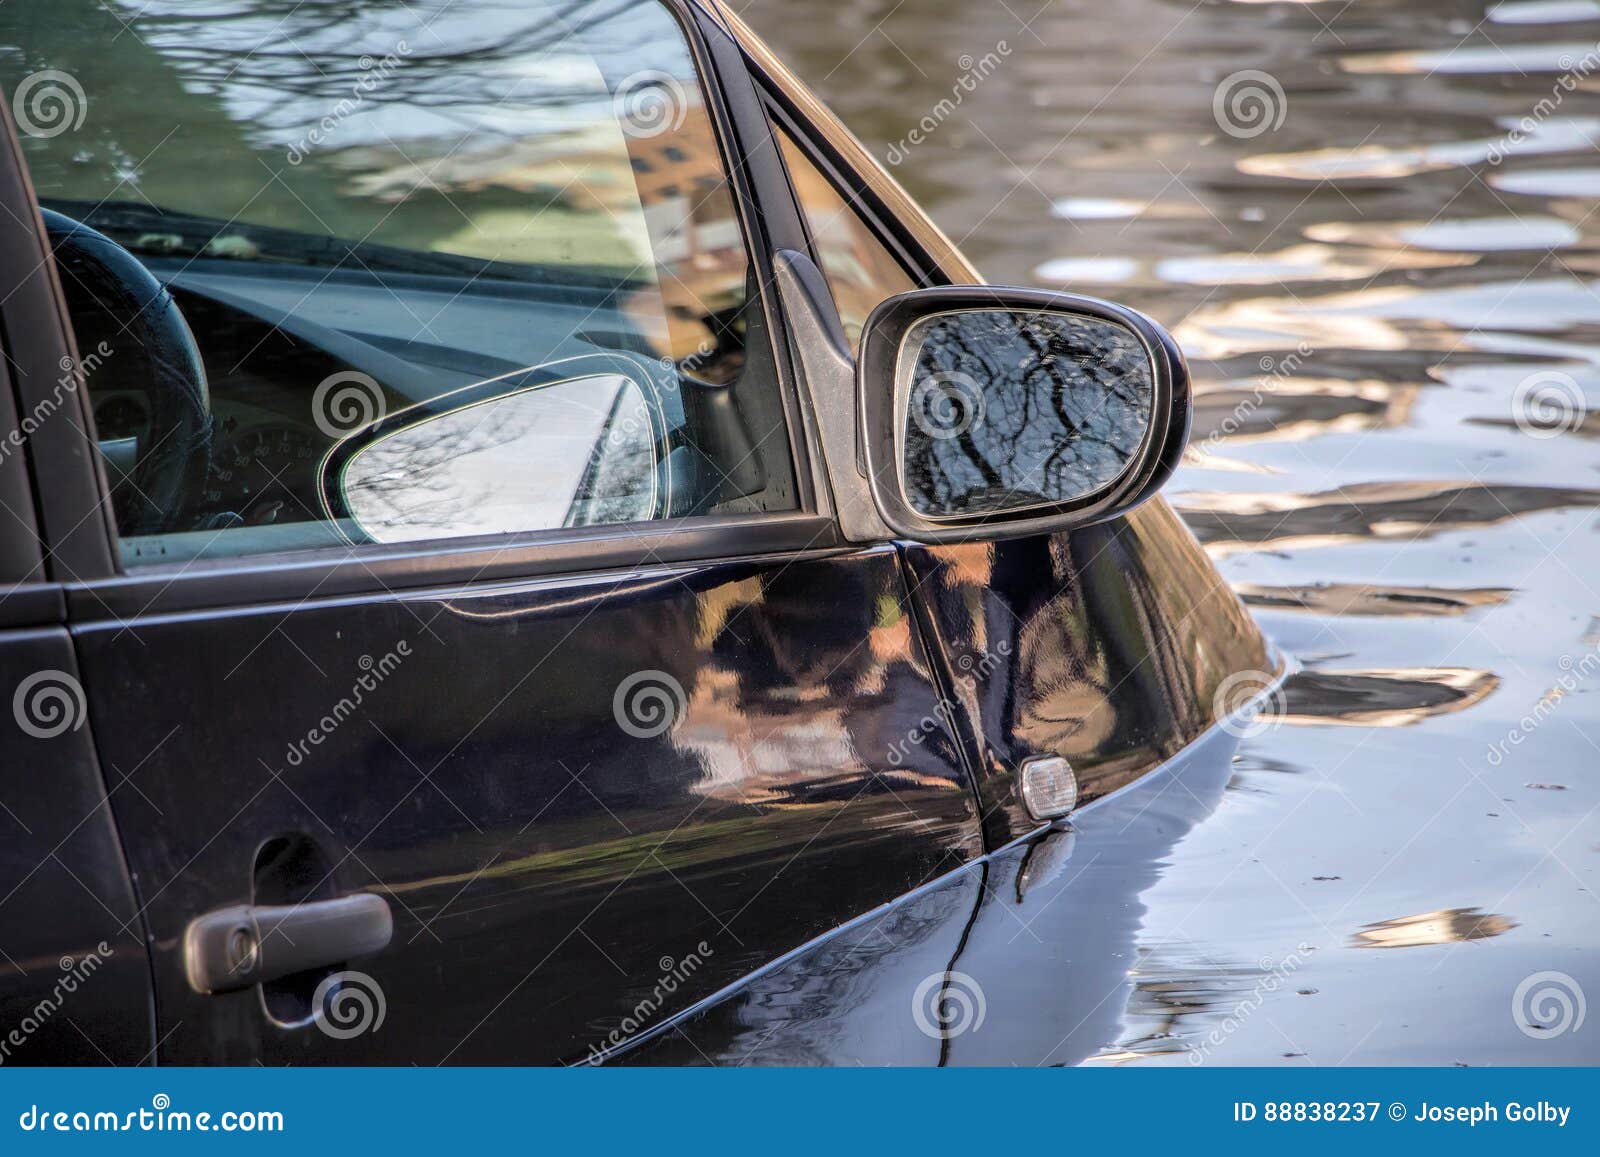 car submerged in flood water.